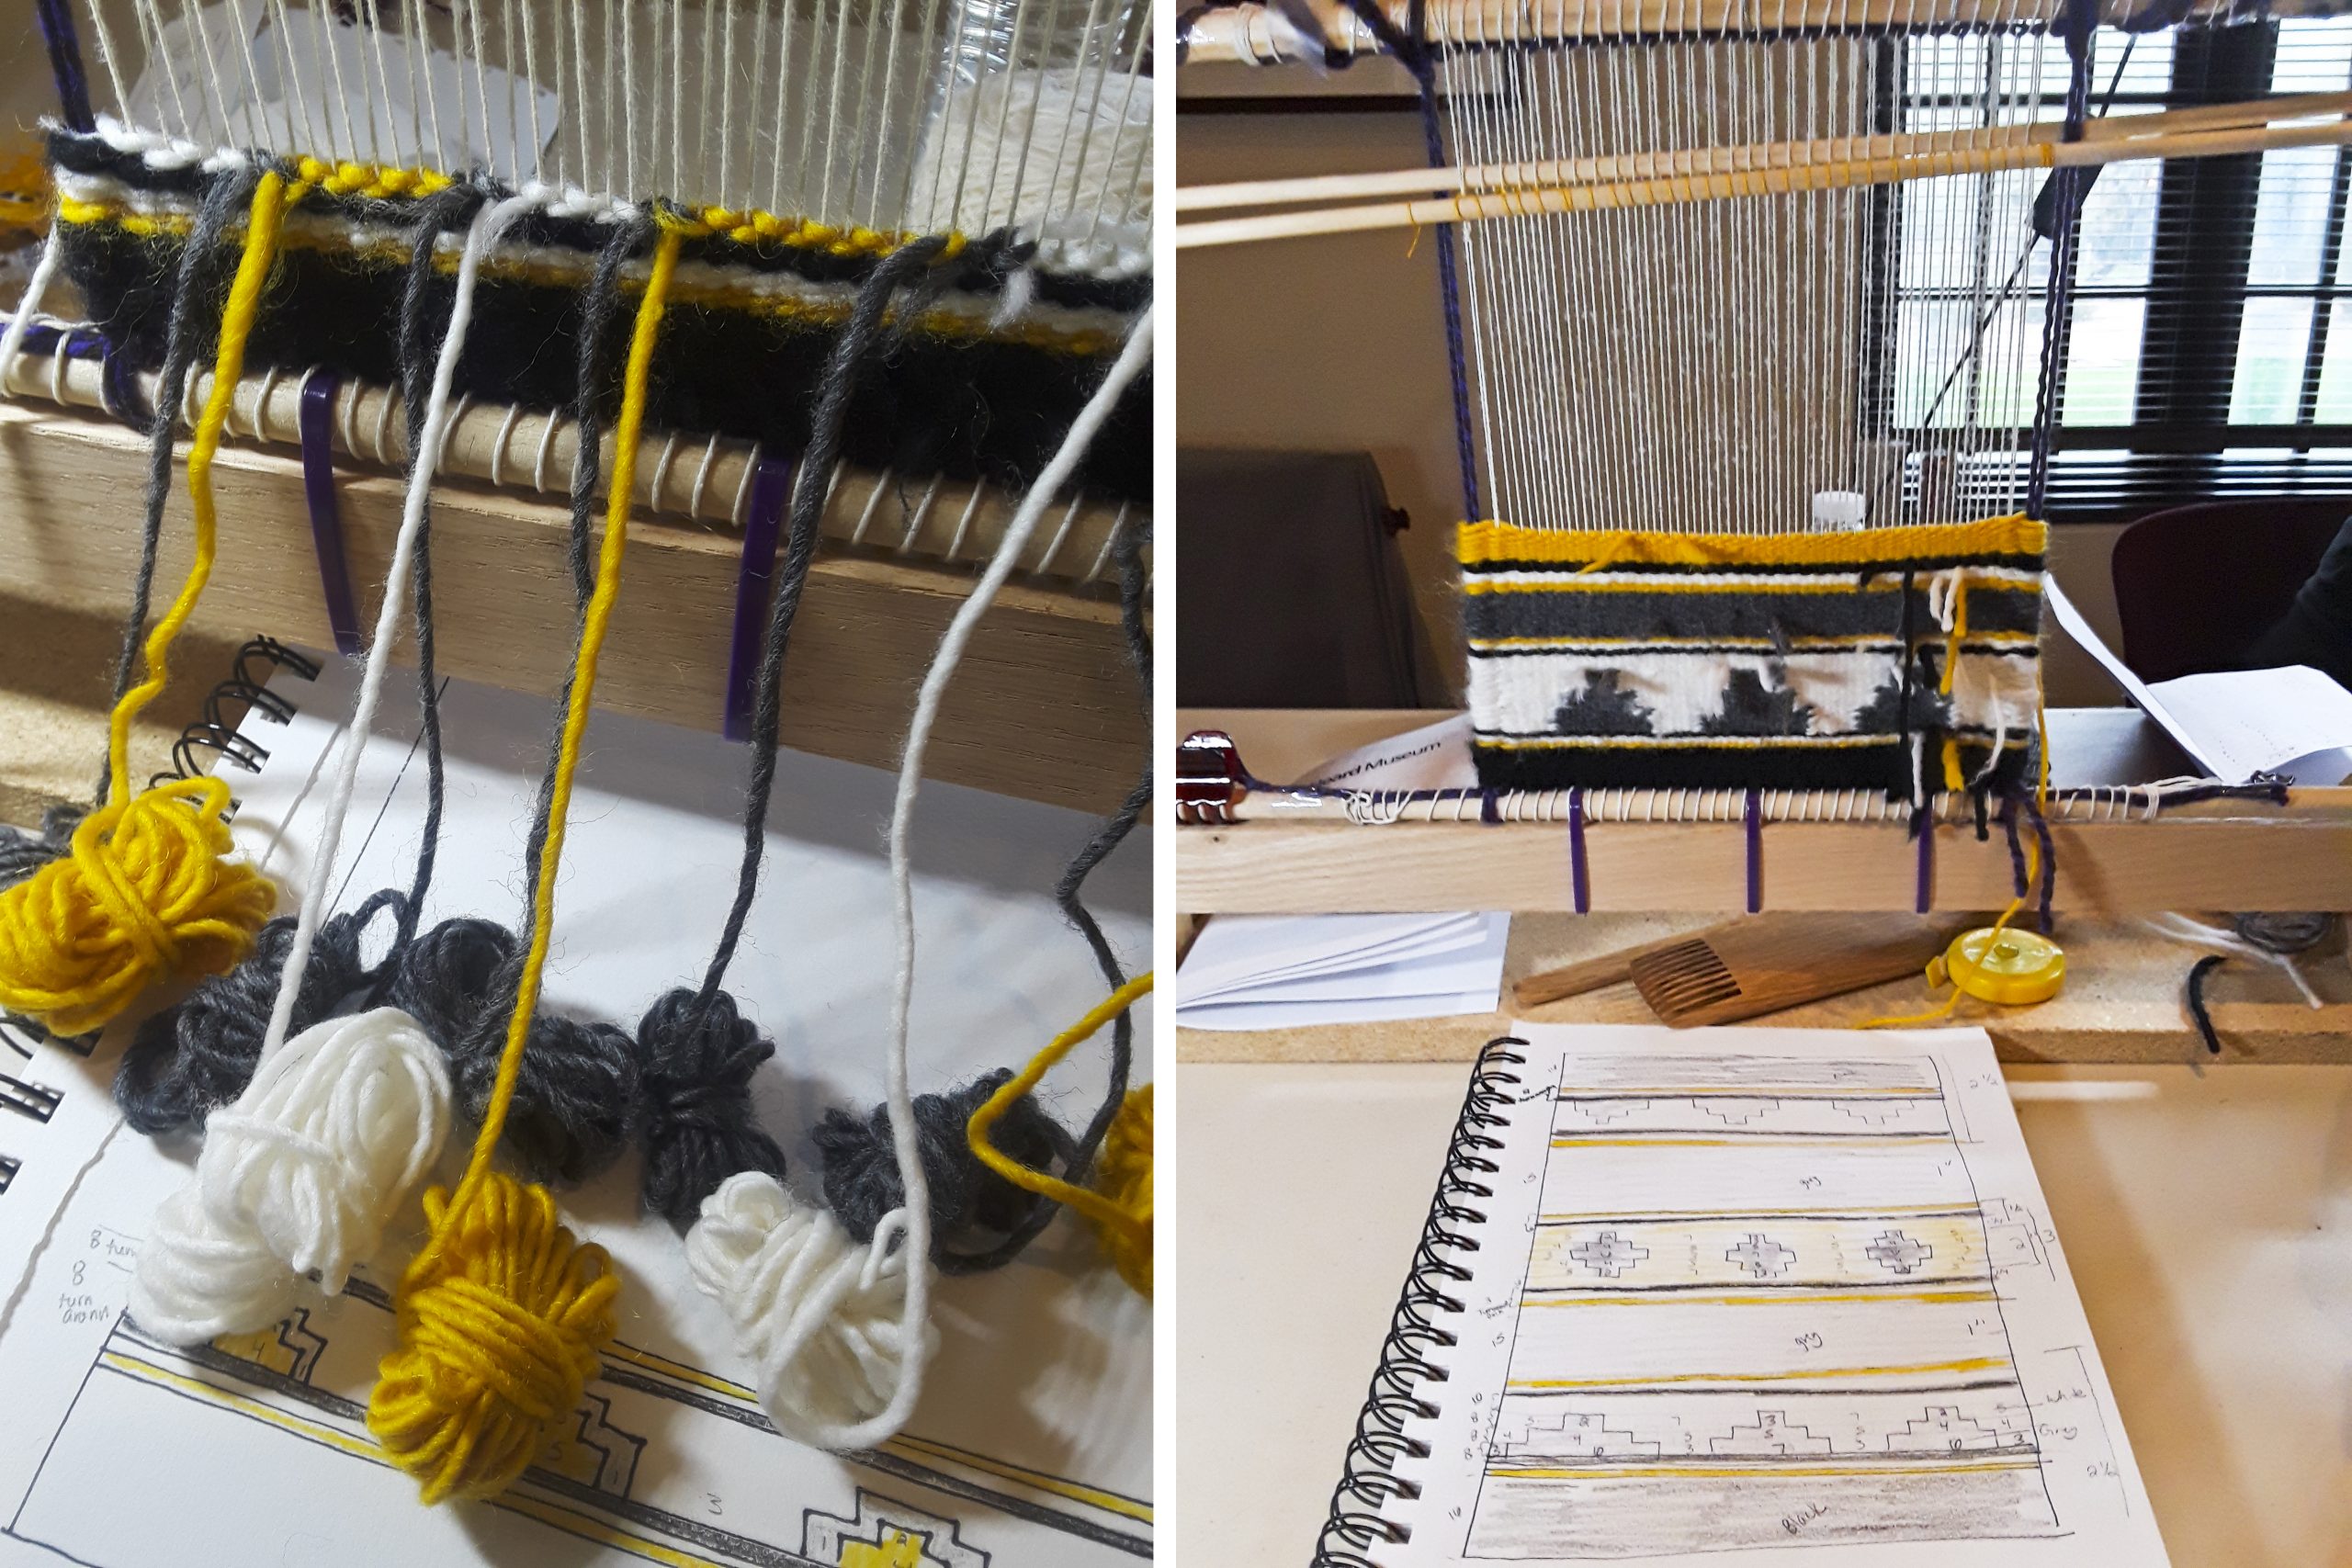 Preparations and beginning work on the weaving on the loom